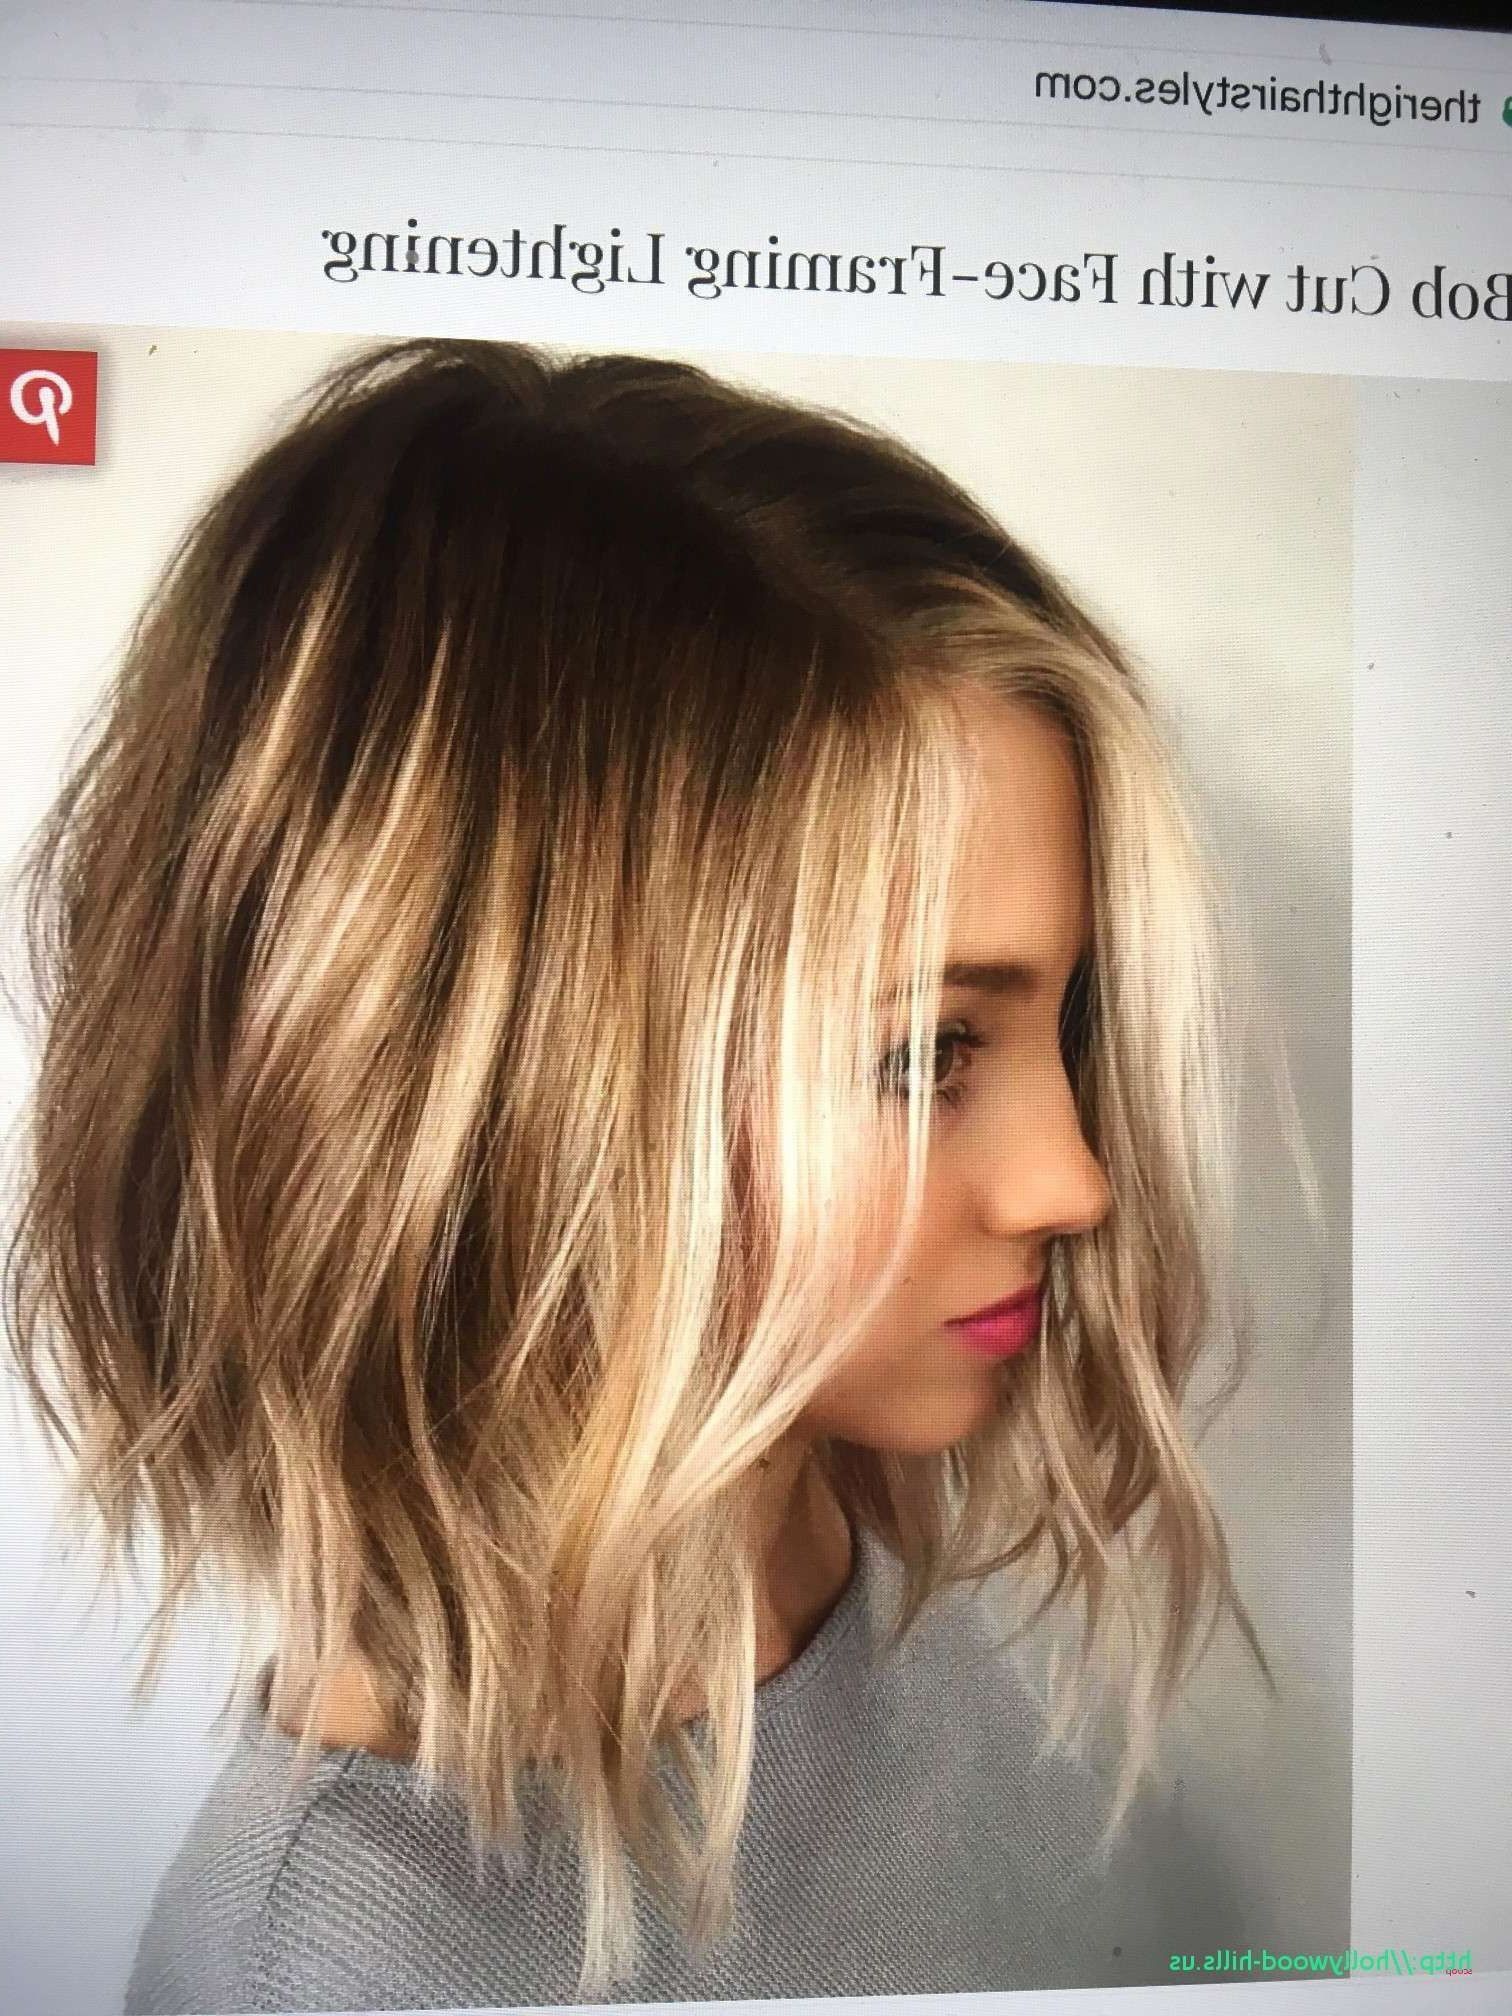 Famous Blunt Bob Hairstyles Inside Bob Haircuts For Oval Faces 2019 Hairstyles Blunt Bob  (View 3 of 20)